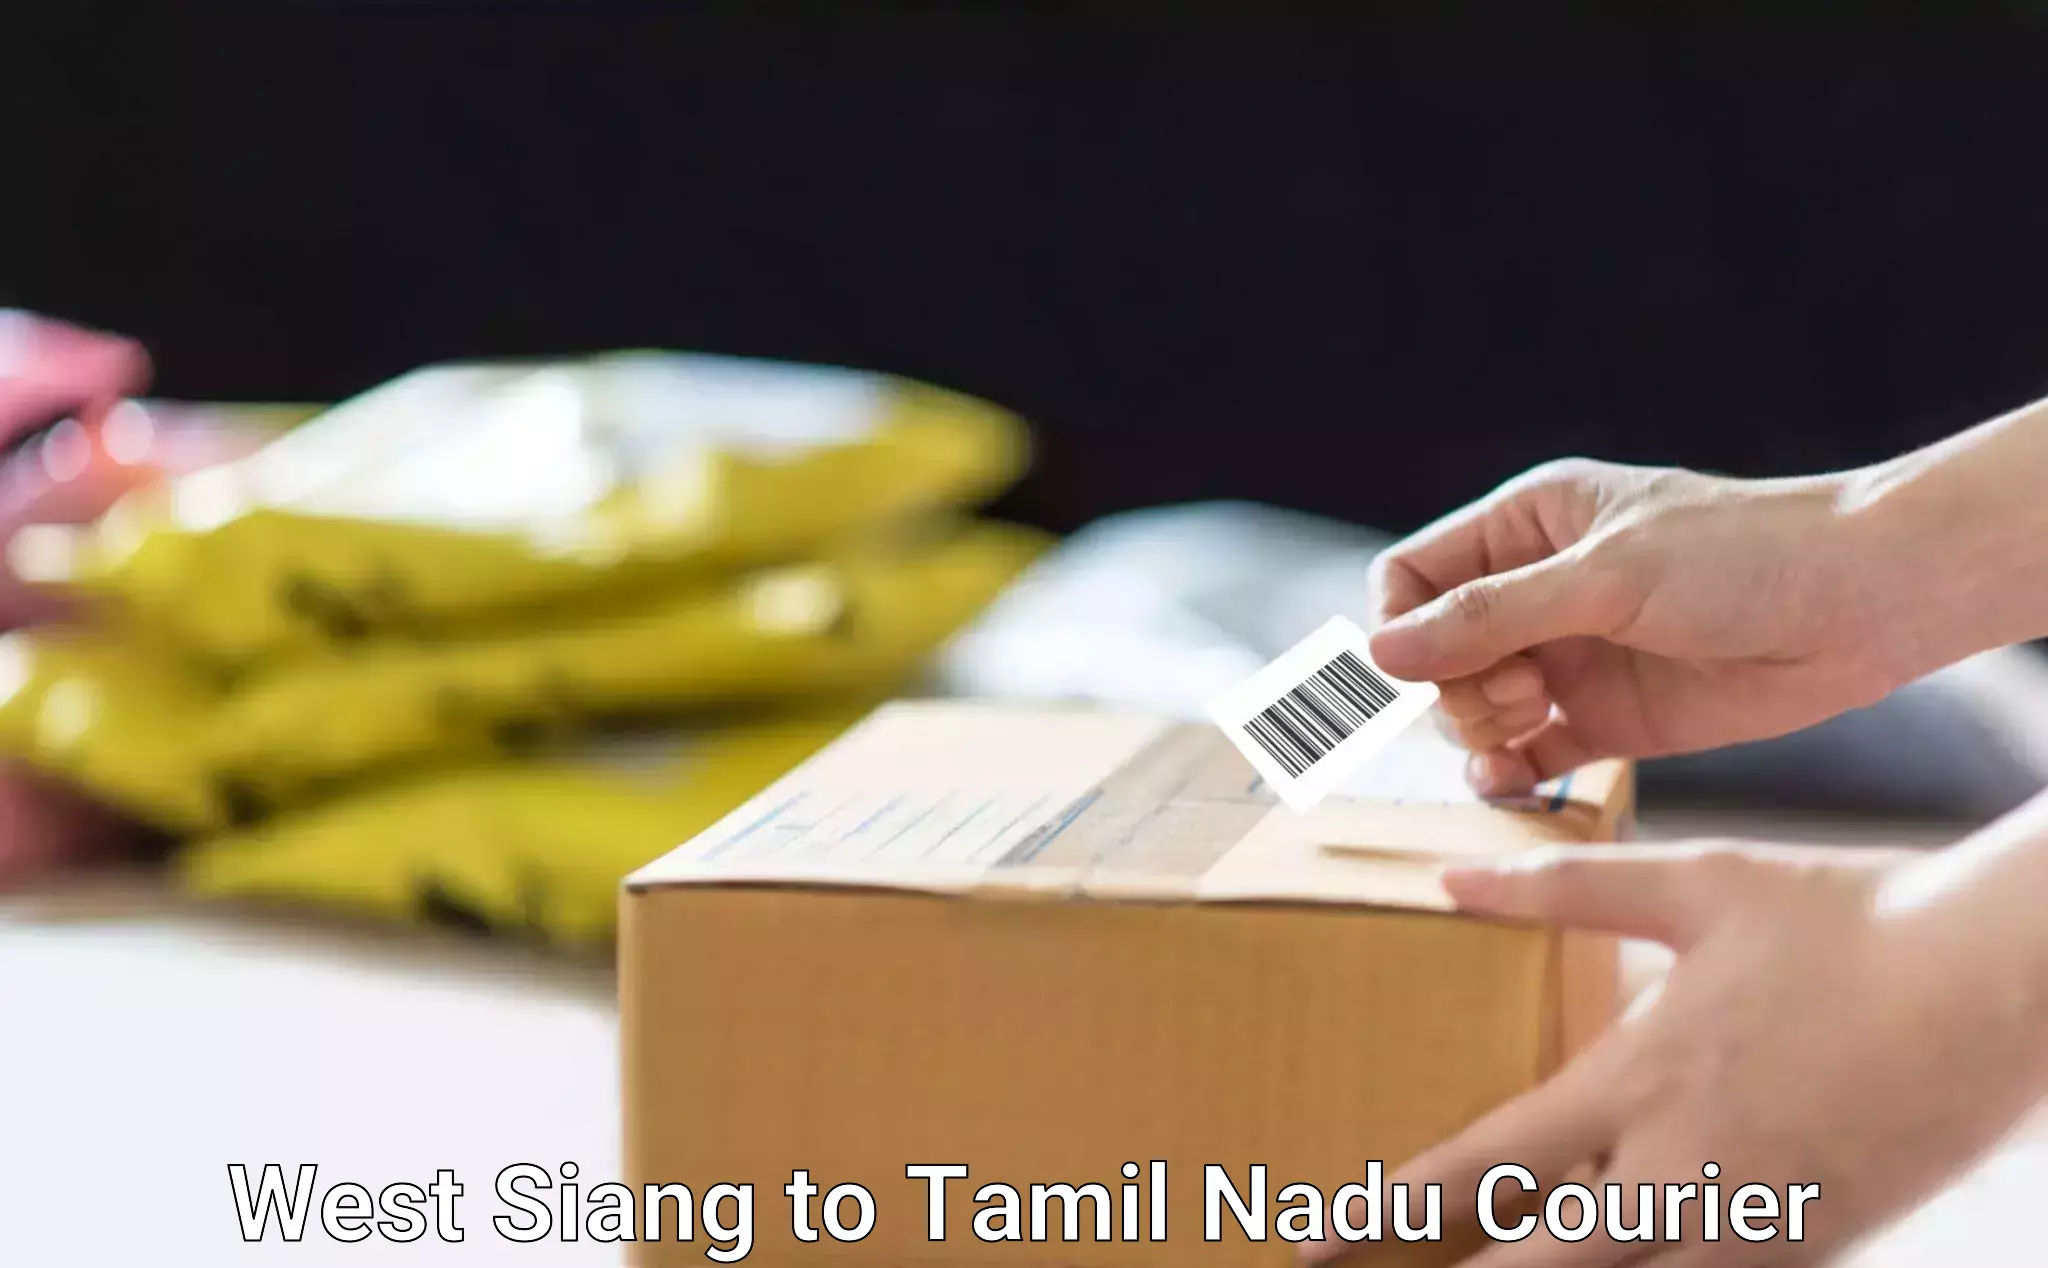 Efficient parcel tracking West Siang to Chengalpattu